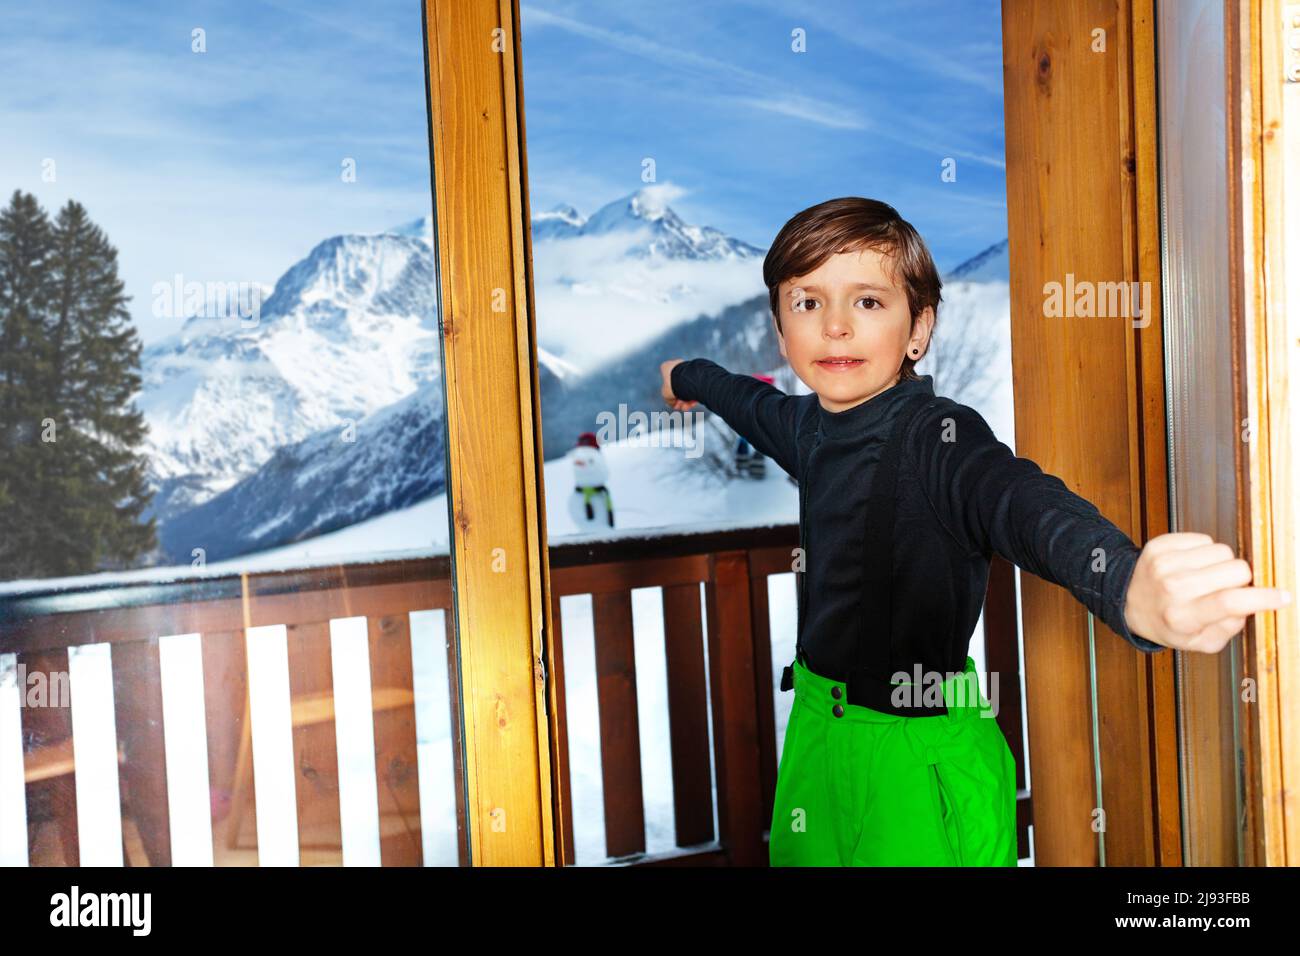 Boy in ski outfit open the door to mountain peaks panorama Stock Photo